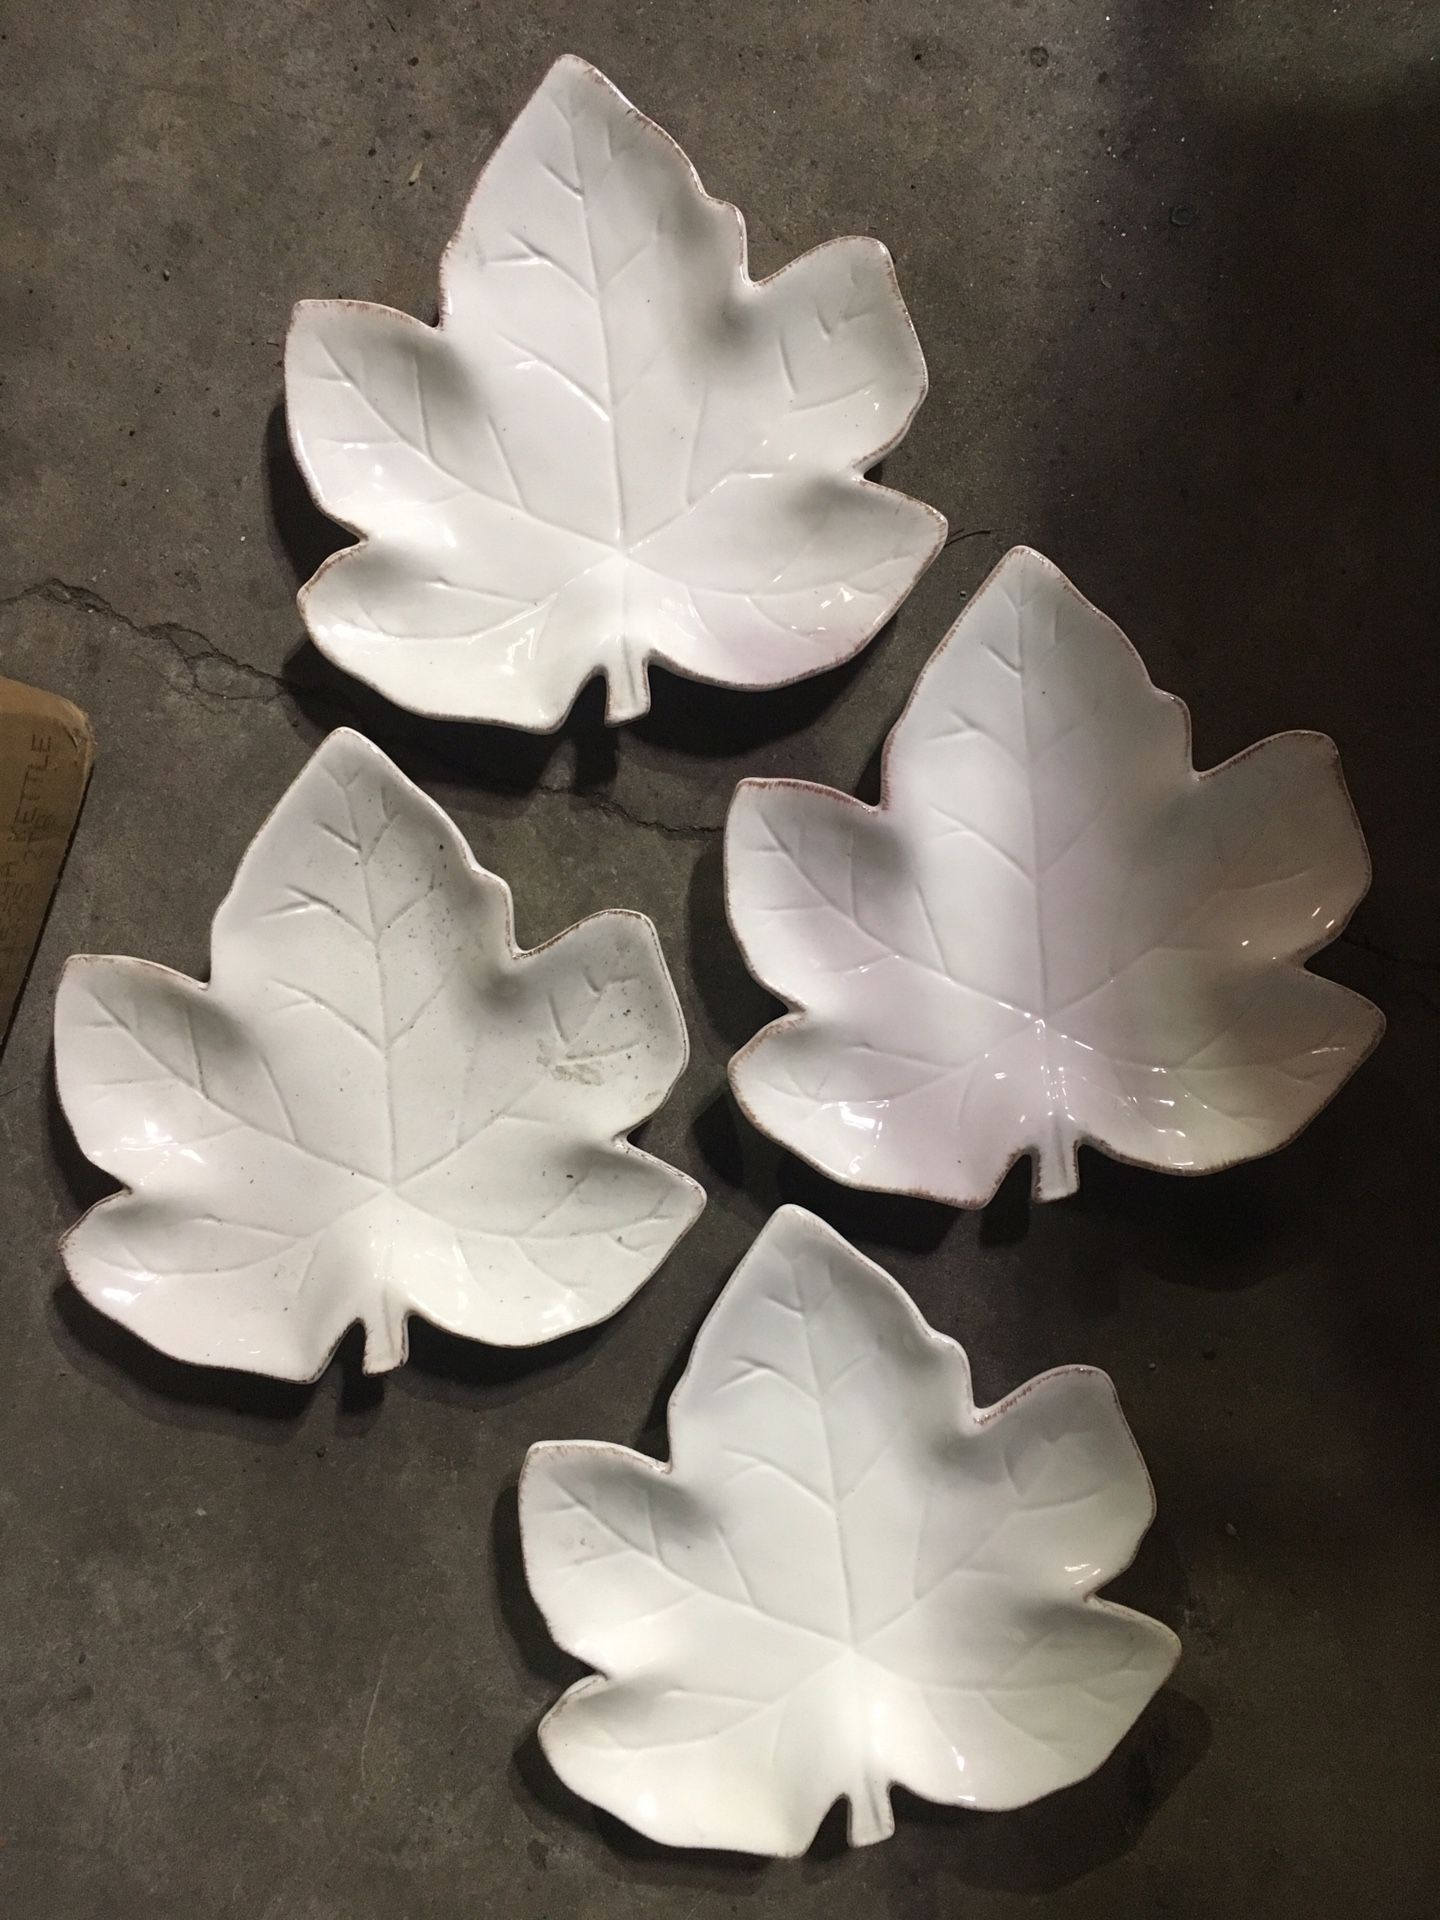 Leaf plates, white curtains and more